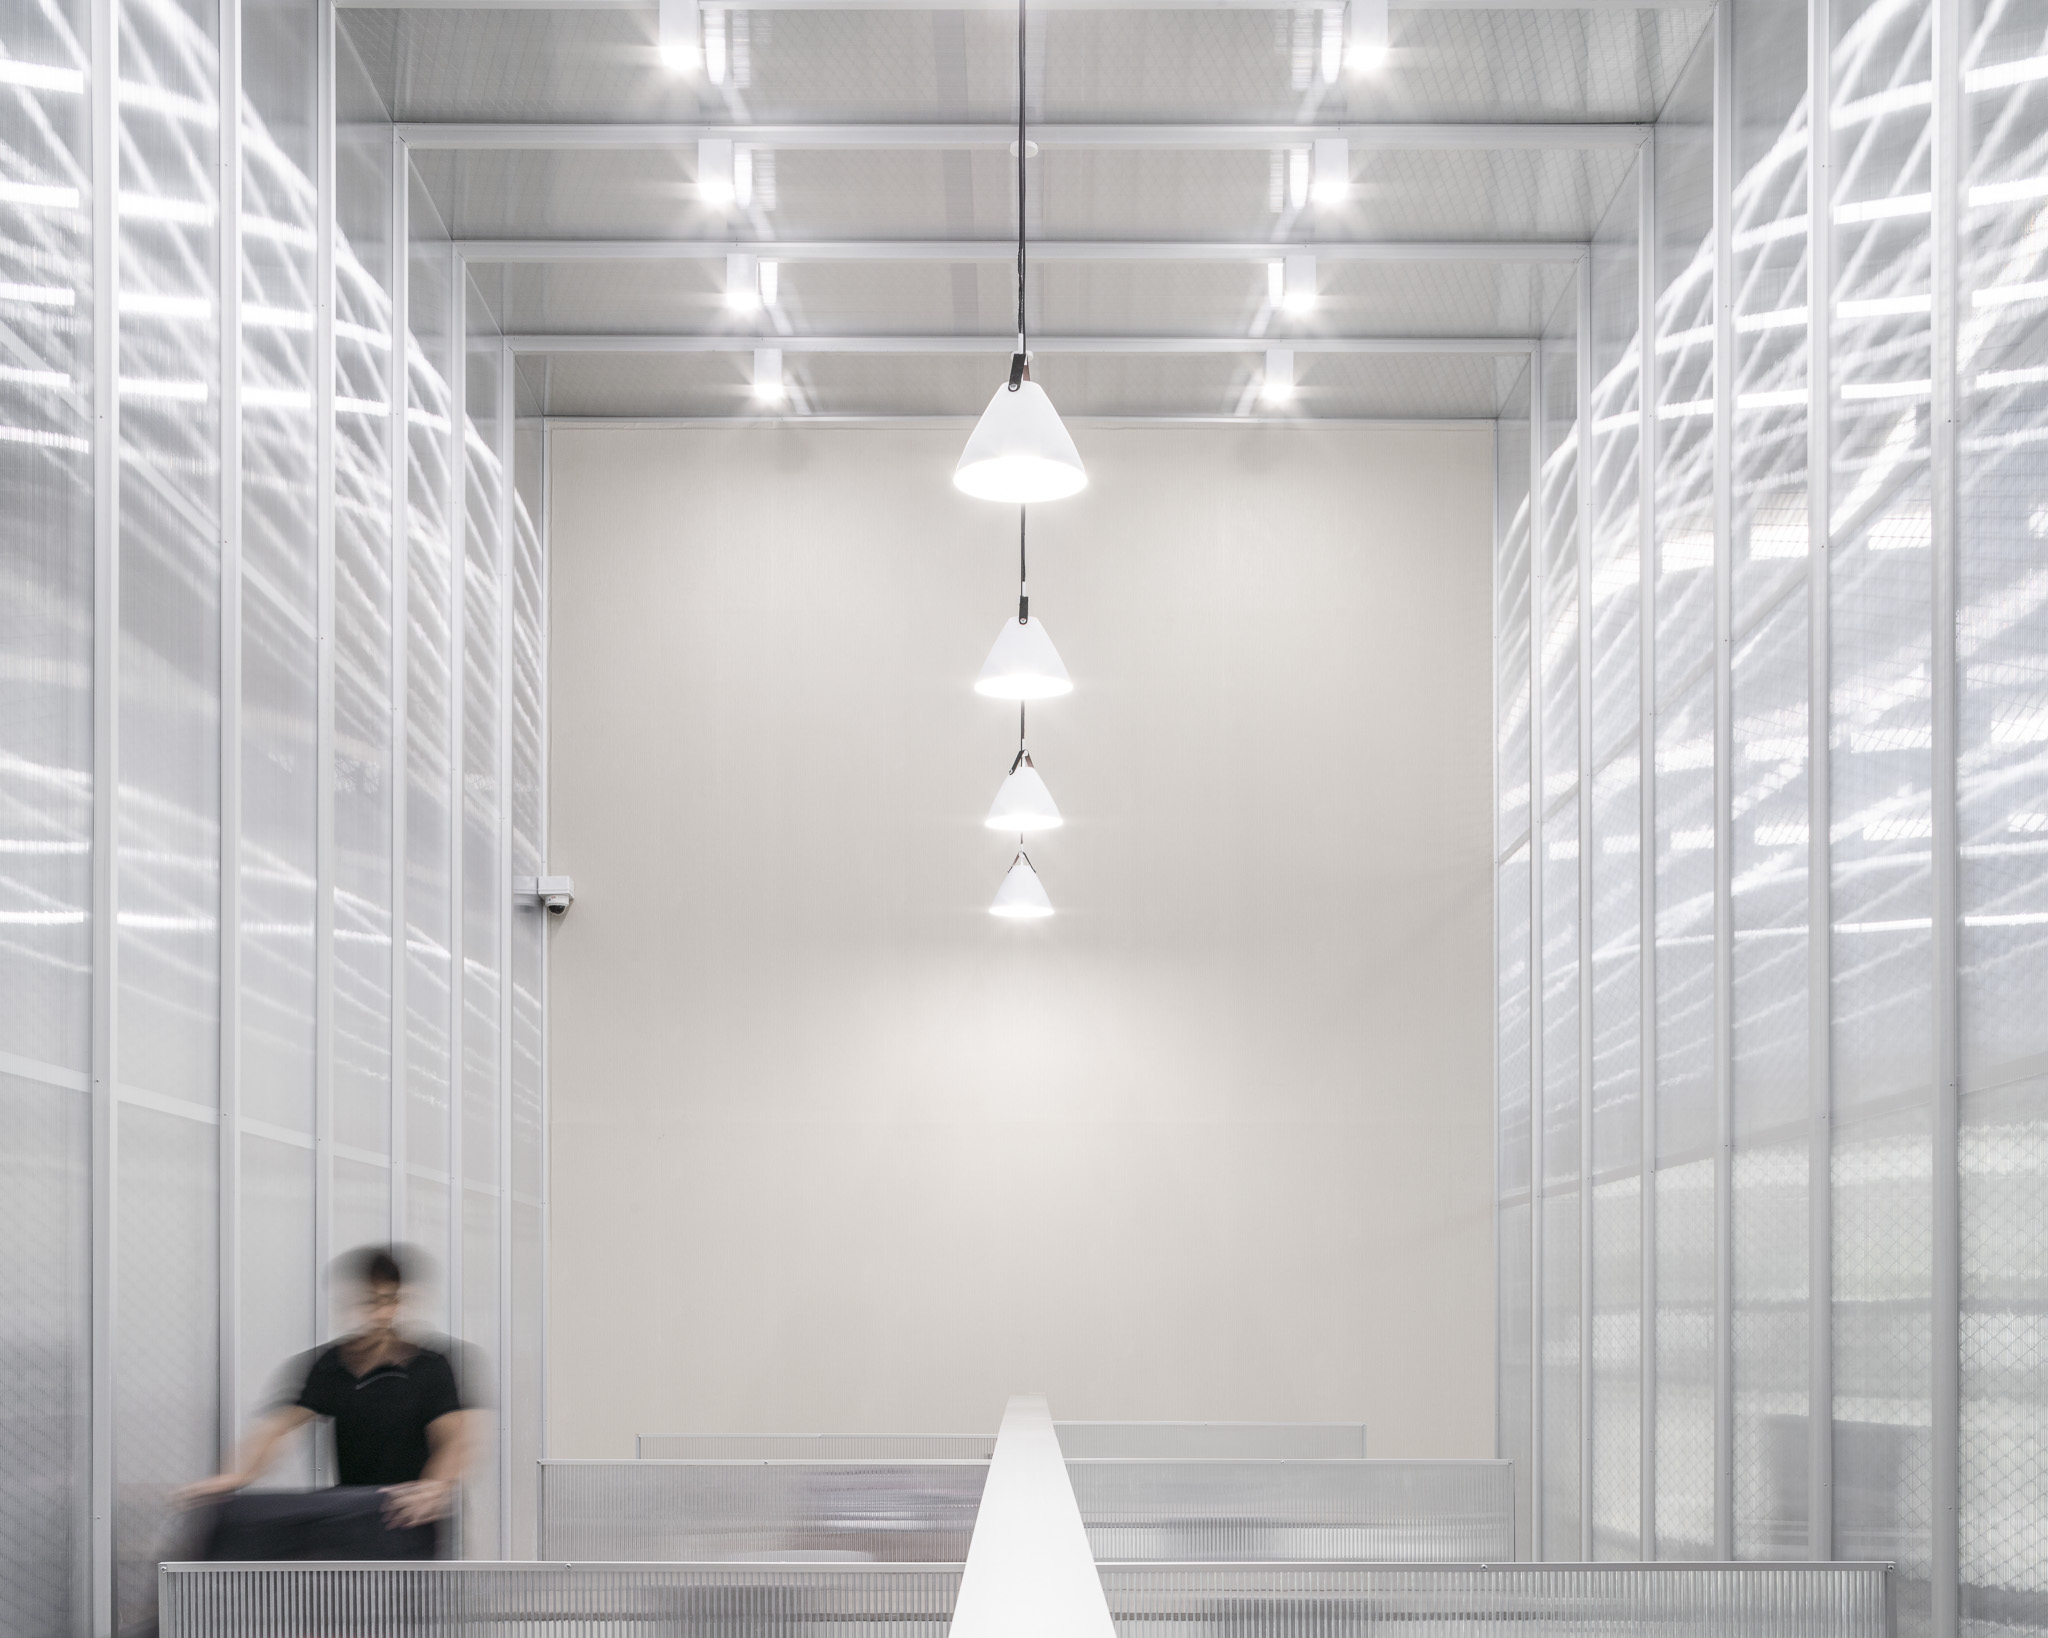 TarnBuch Industry Head Office by Silp Architects - Sofography - Architectural Photography - Chalermwat Wongchompoo - ช่างภาพสถาปัตยกรรม - ถ่ายภาพสถาปัตยกรรม